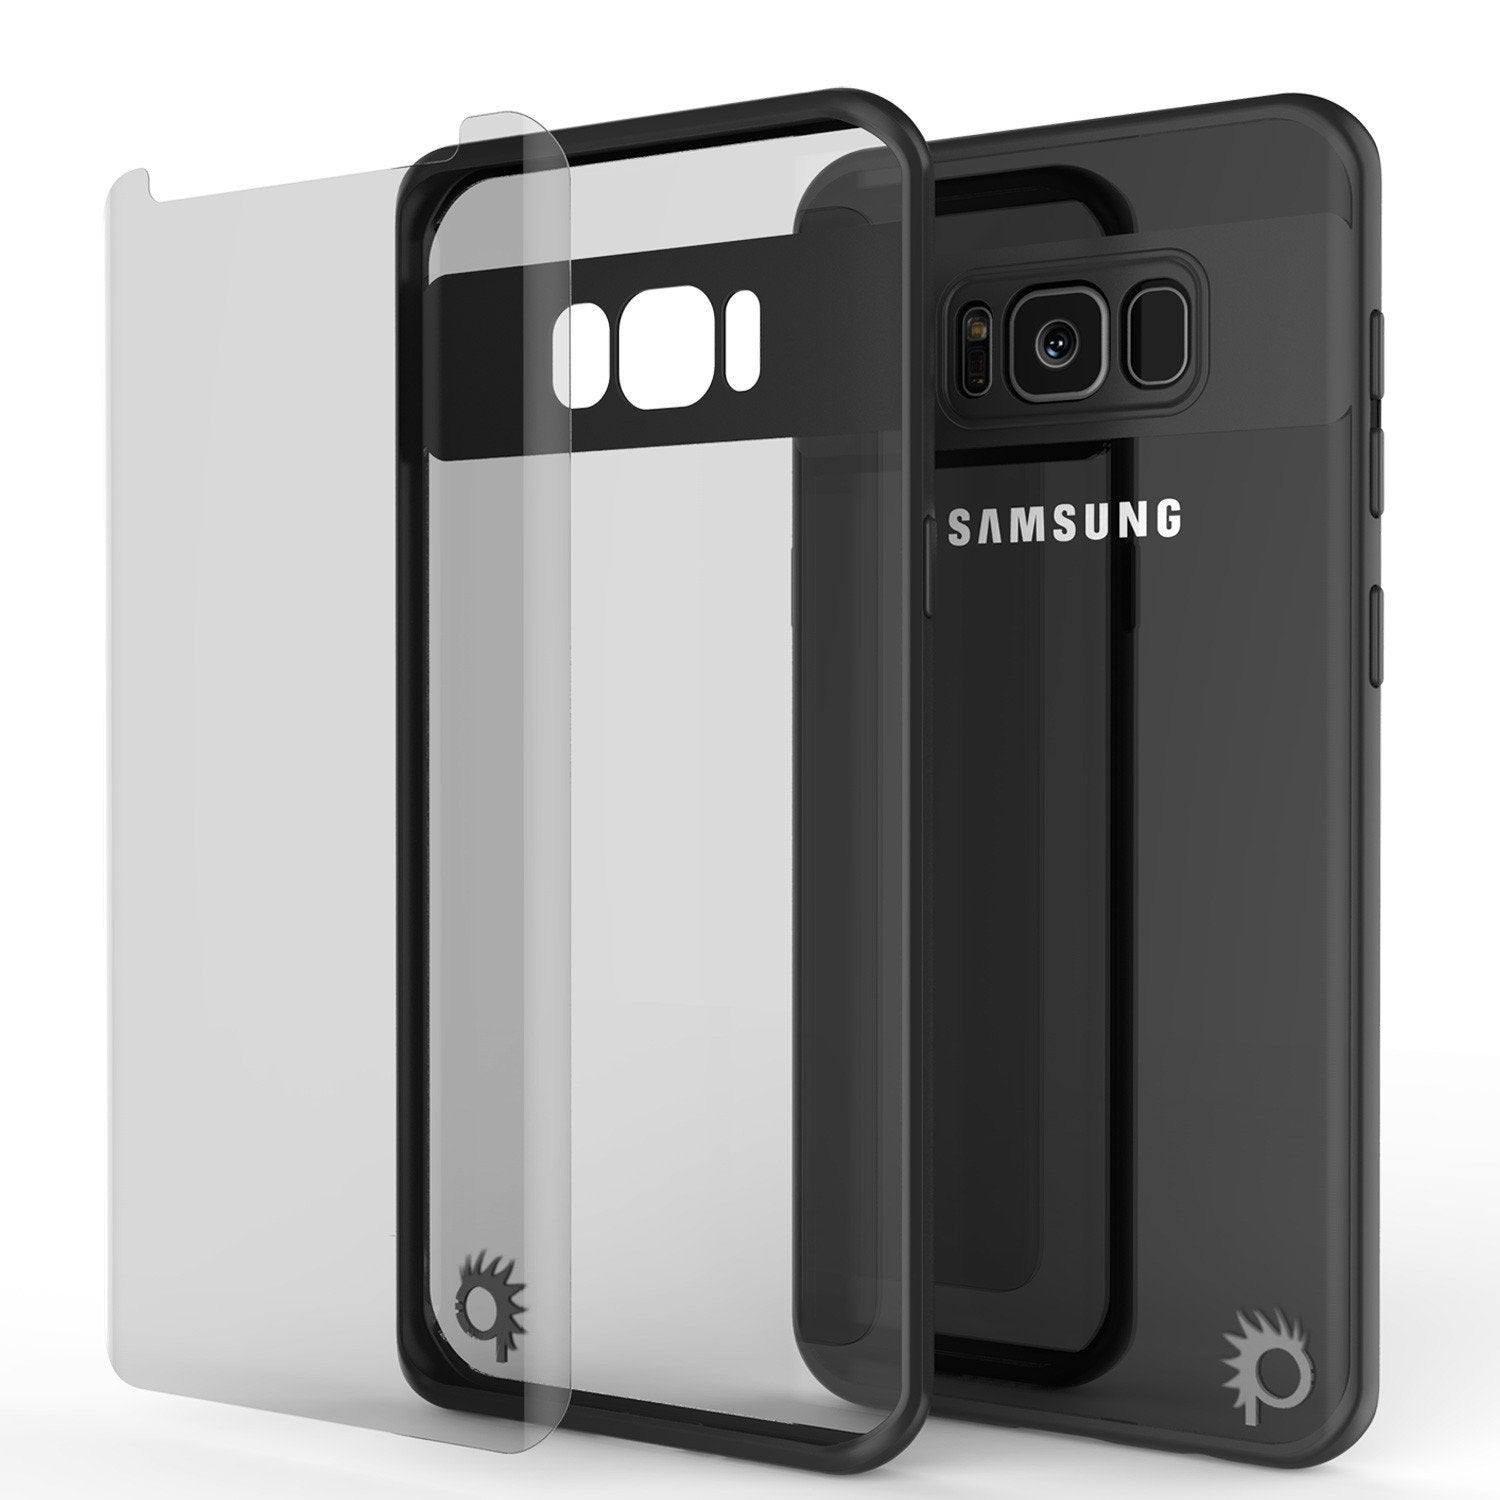 Galaxy S8 Case, Punkcase [MASK Series] [BLACK] Full Body Hybrid Dual Layer TPU Cover W/ Protective PUNKSHIELD Screen Protector - PunkCase NZ